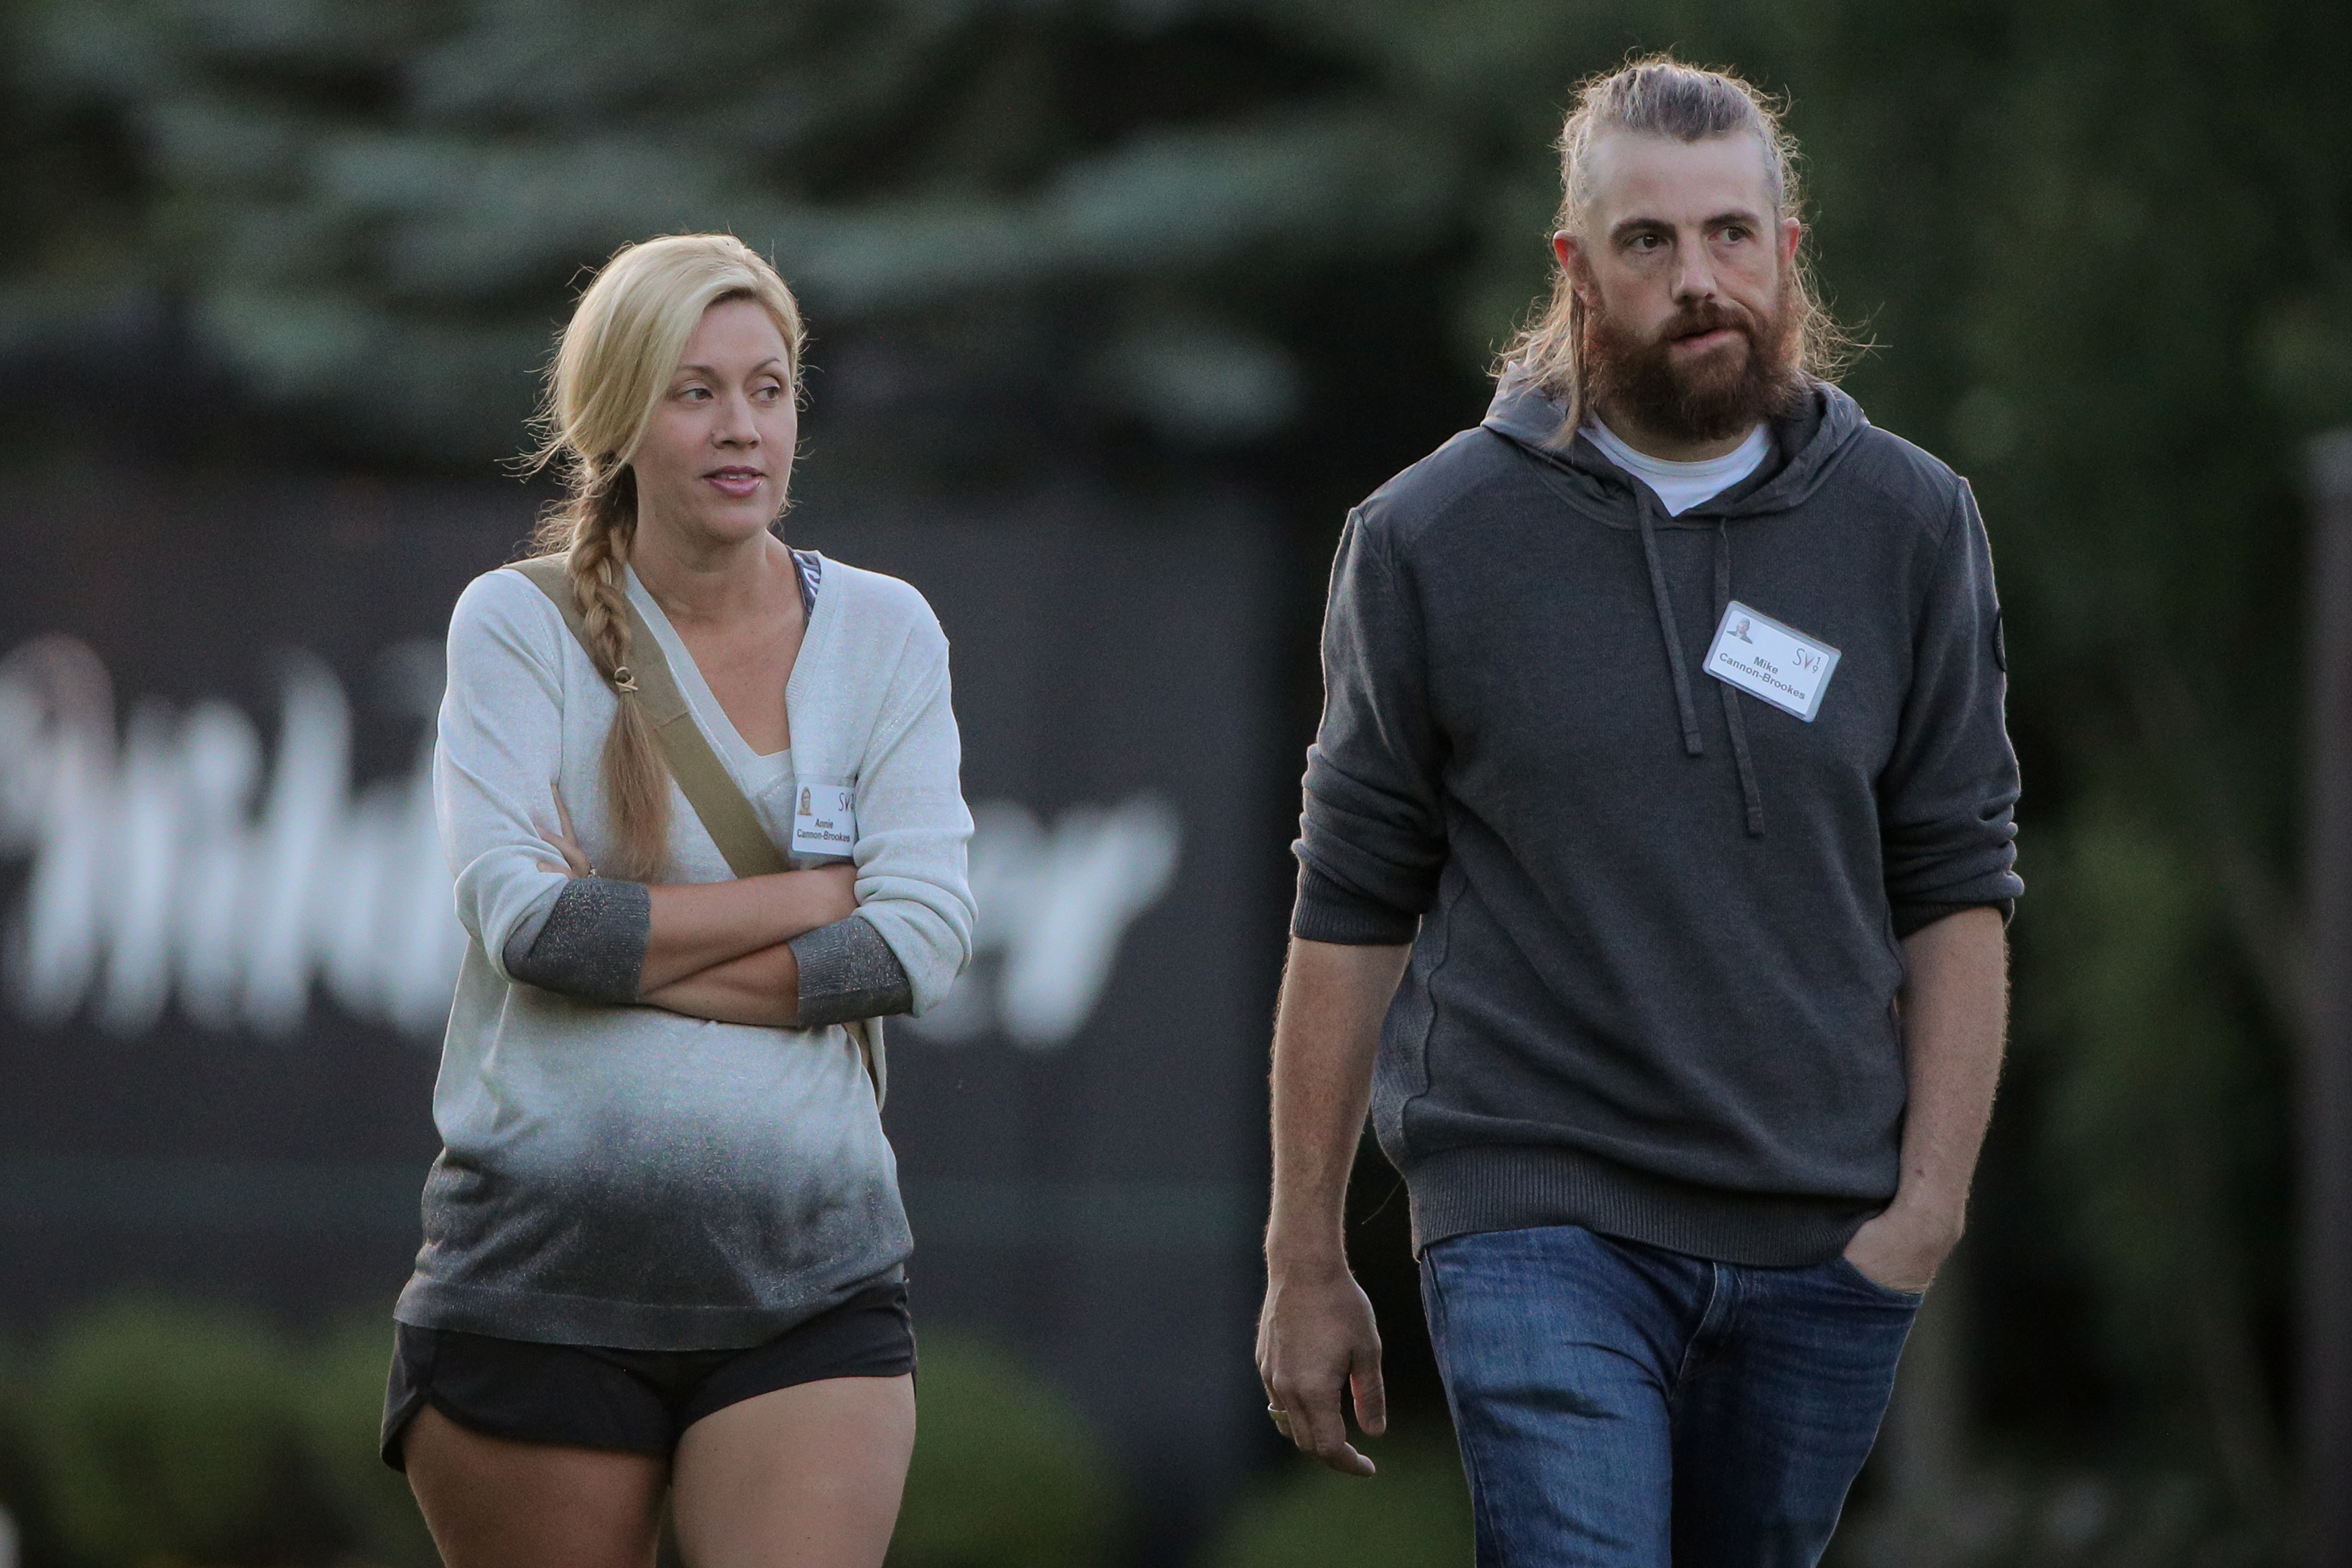 Annie Cannon-Brookes and Mike Cannon-Brookes, chief executive officer of Atlassian, attend the annual Allen and Co. Sun Valley media conference in Sun Valley, Idaho